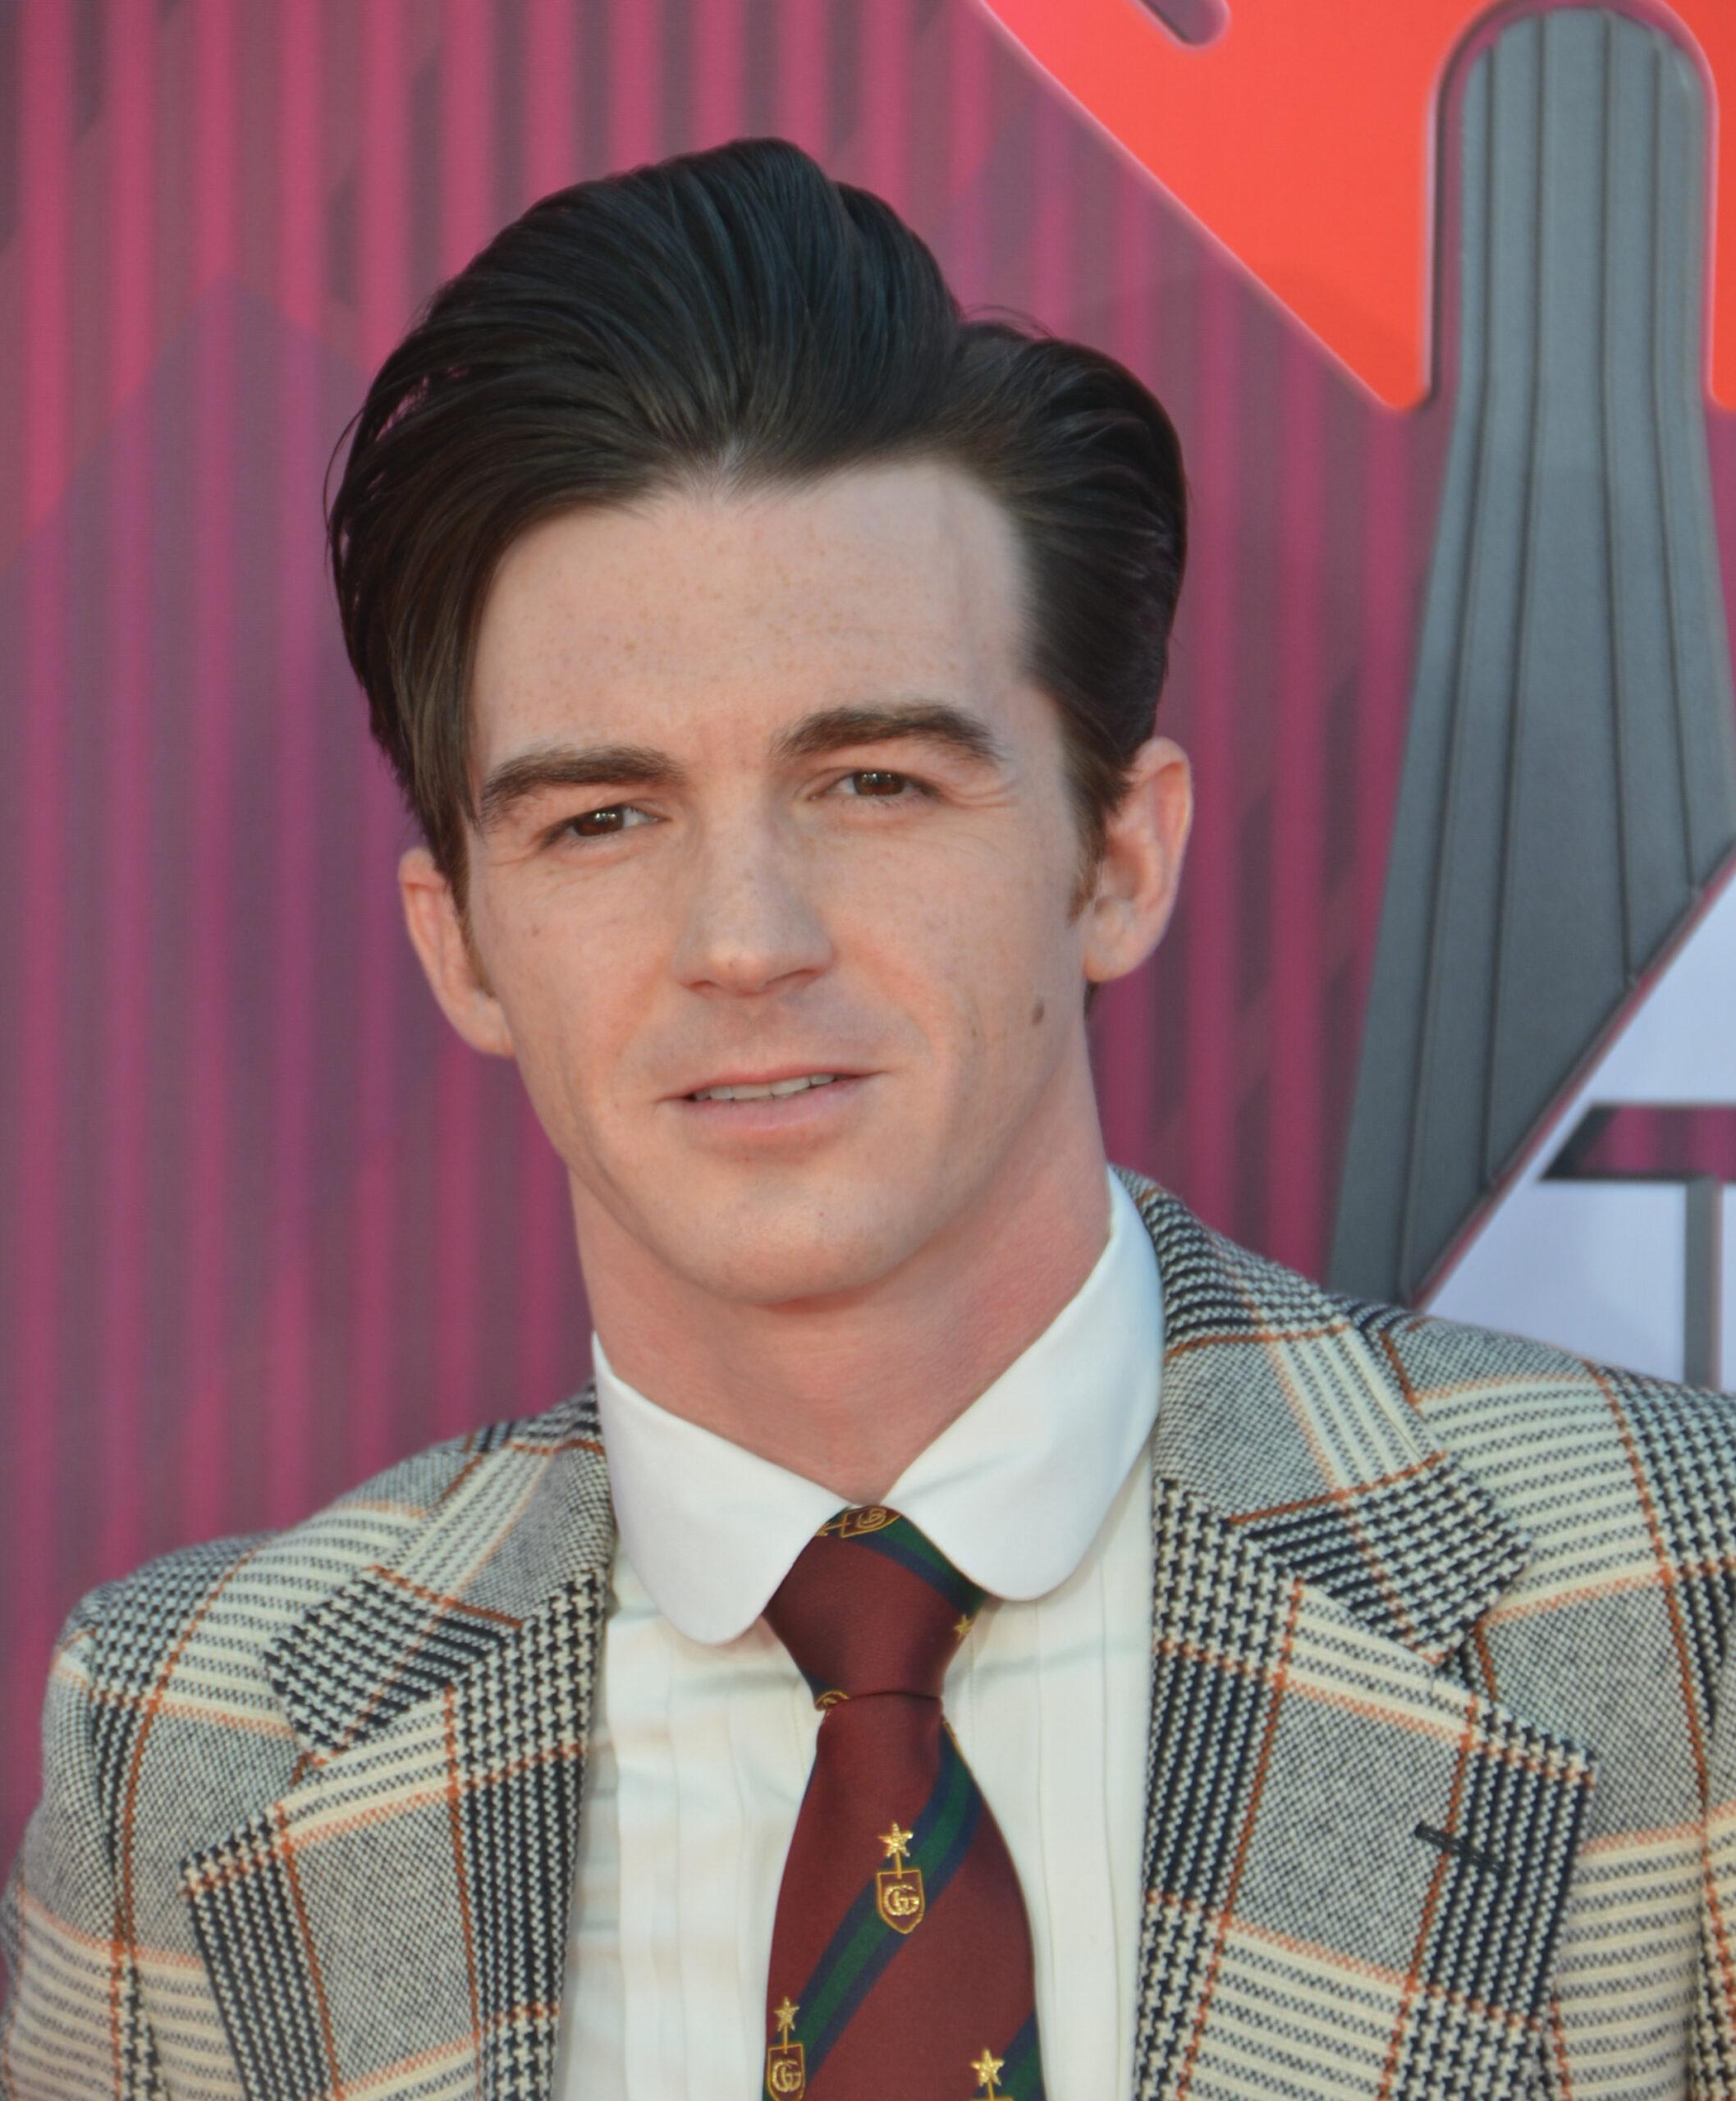 Drake Bell at the 2019 iHeart Radio Music Awards - Arrivals